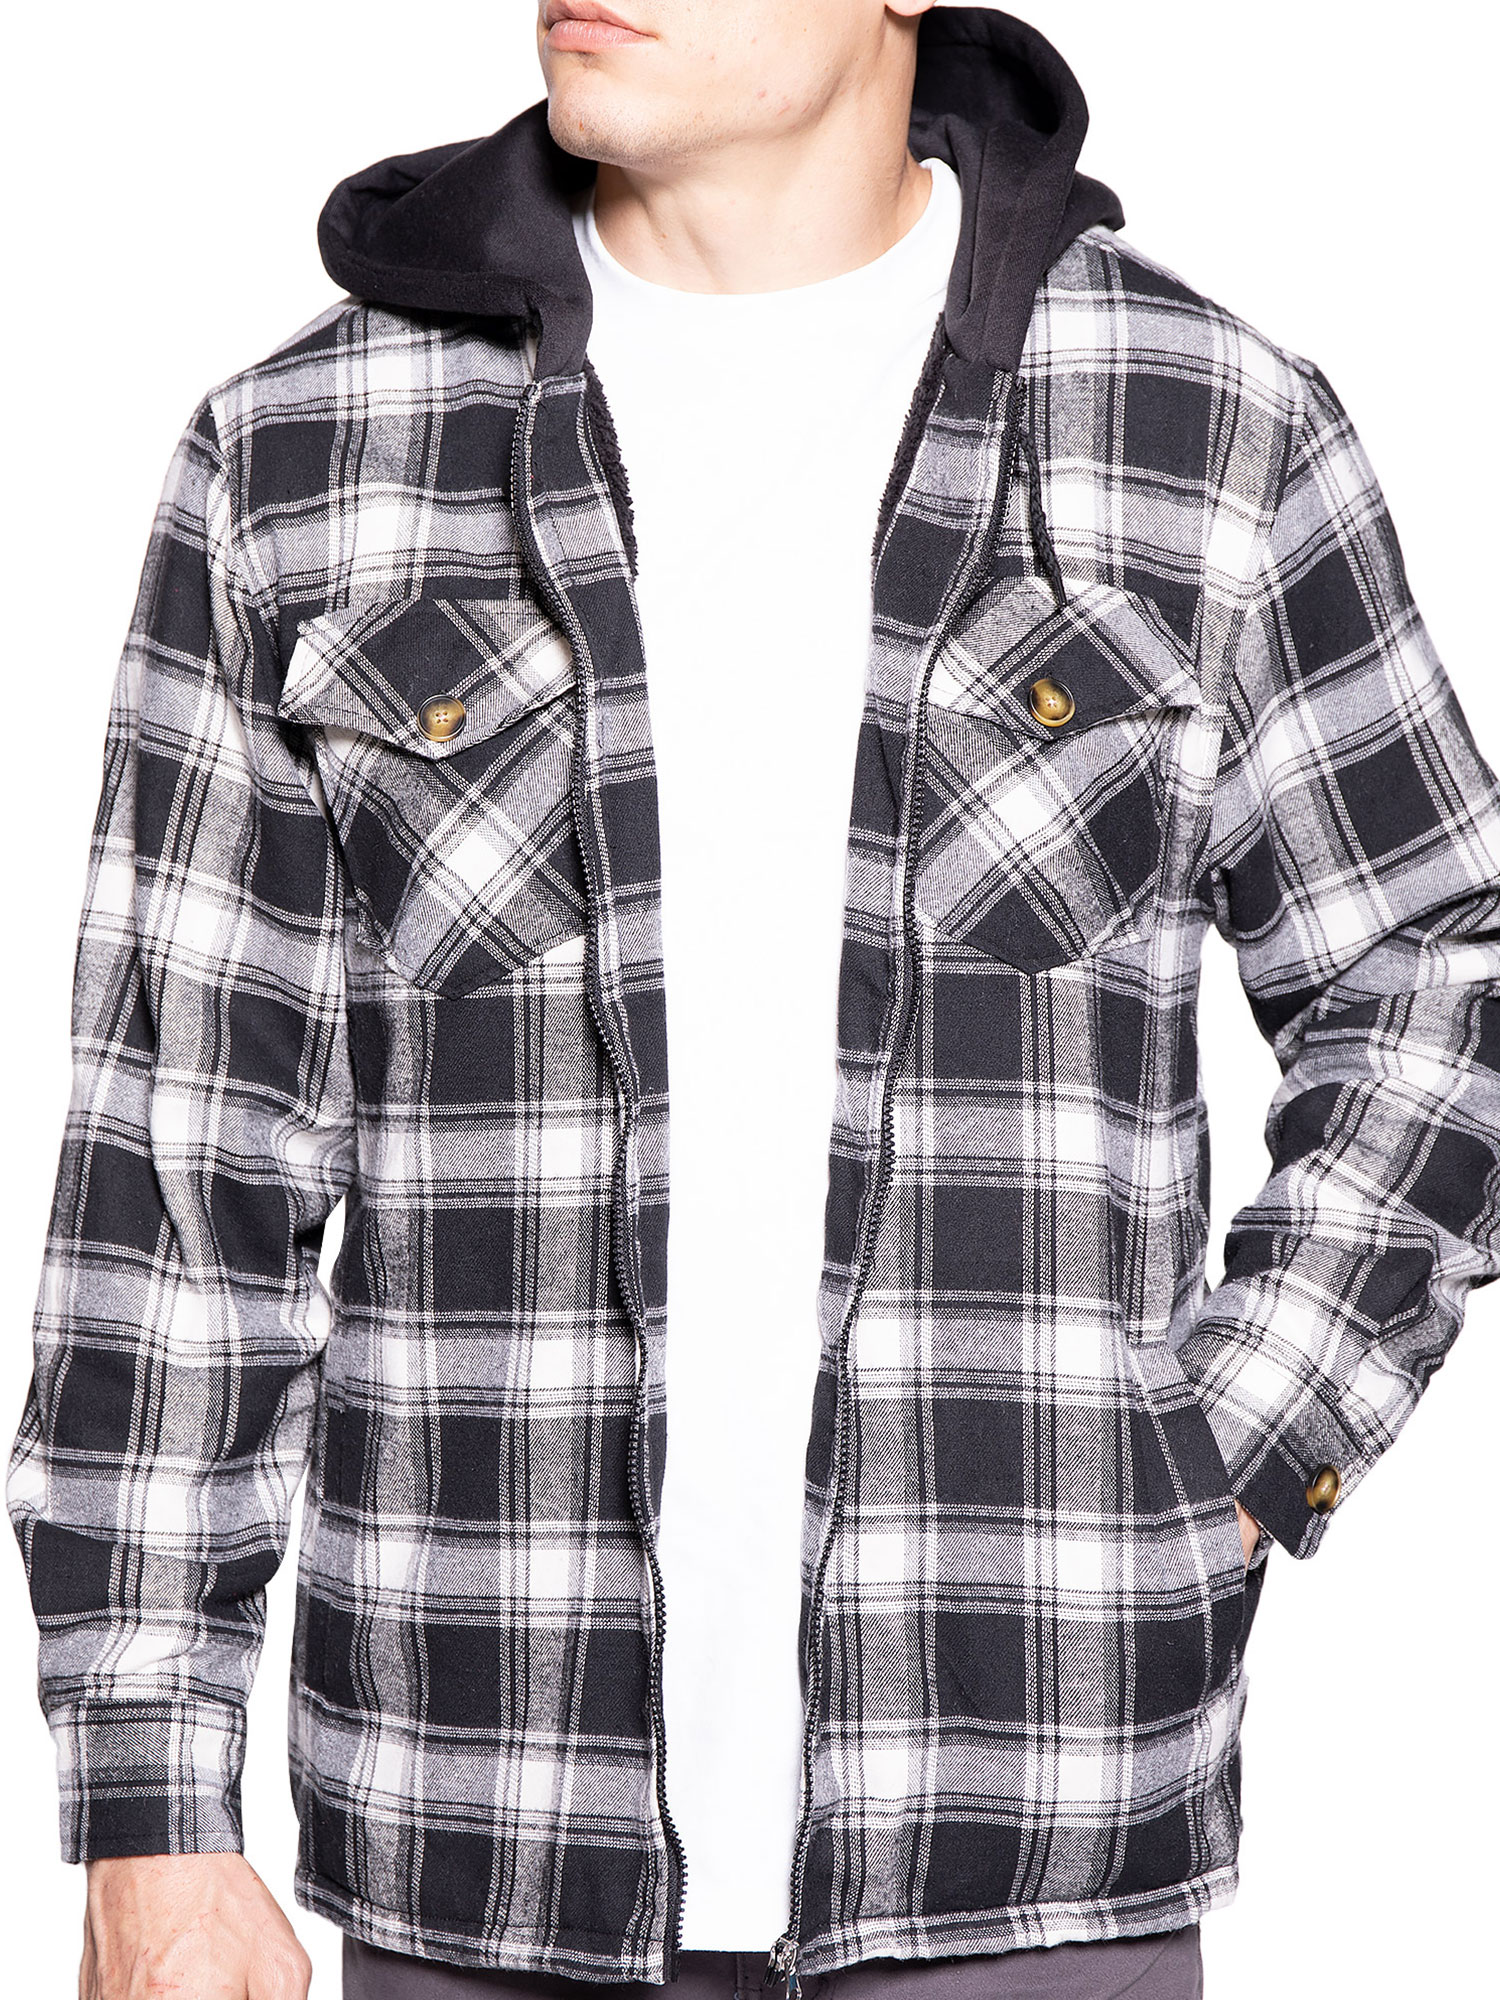 Visive Mens Heavy Sherpa Fleece-Lined Flannel Hooded Jacket - Big & Tall Sizes - Warm Zip Up Hoodie Jacket for Cold Weather - Perfect for Outdoor Activities - Durable & Fashion-Forward - image 1 of 6